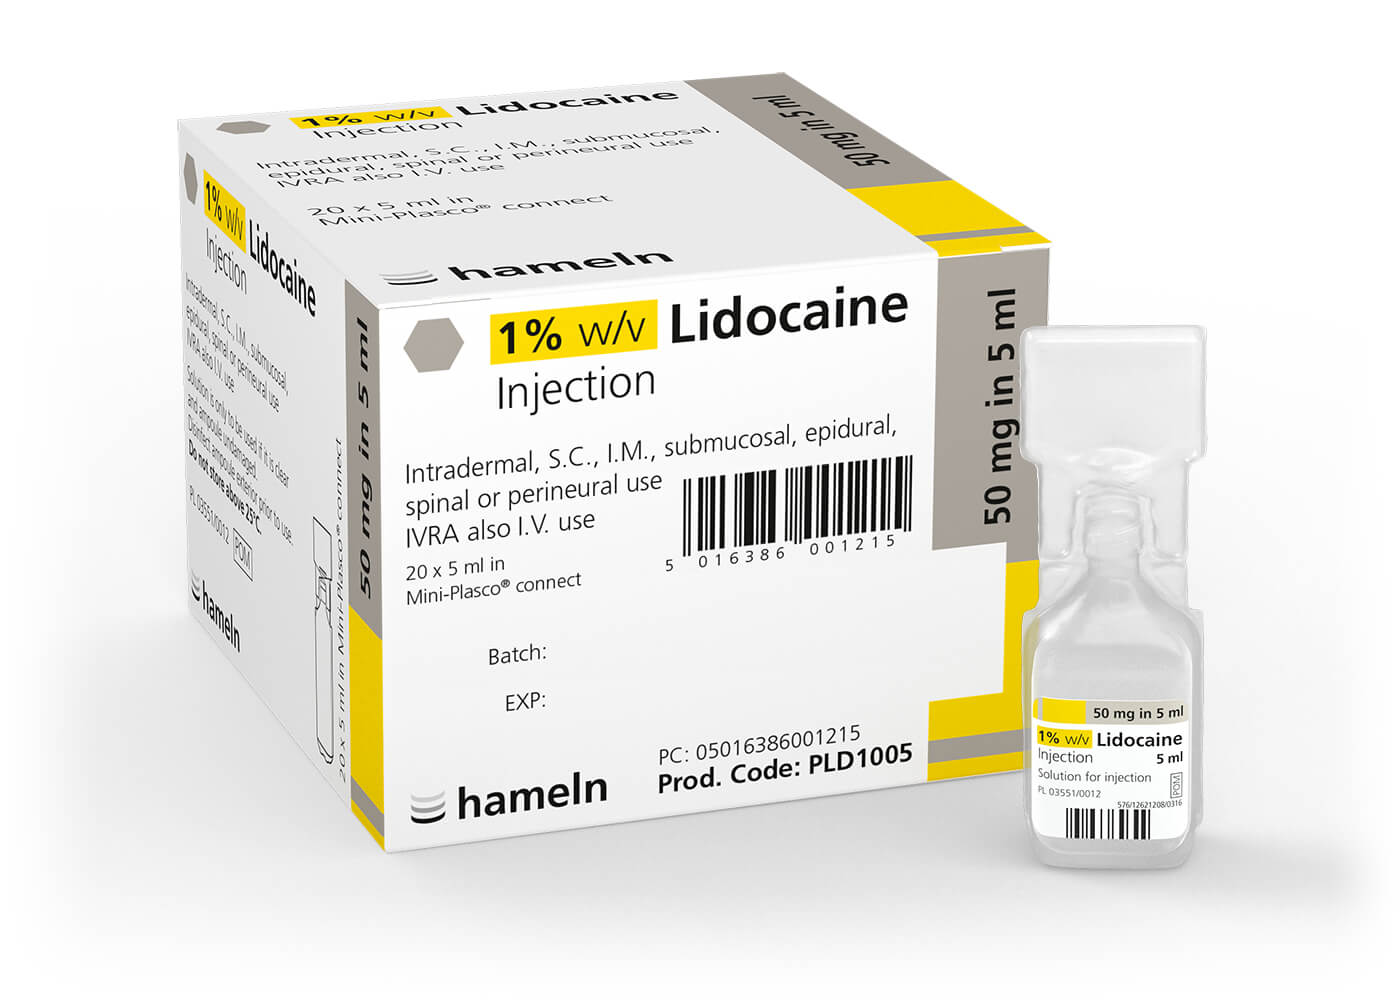 Lidocaine_UK_1pc_50_mg_in_5_ml_Pack_20_St_2021